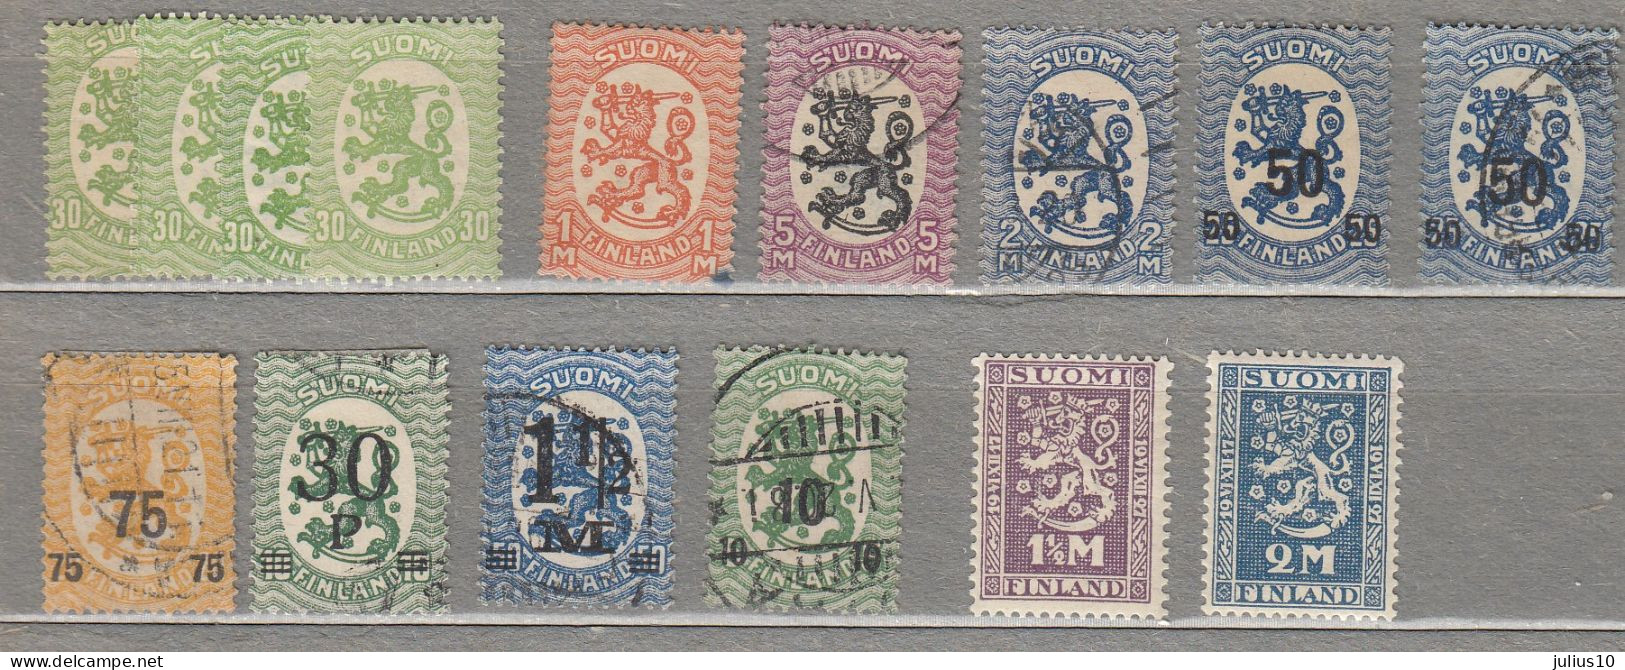 FINLAND 1917-1927 Used/Mint Stamps #22623 - Usados